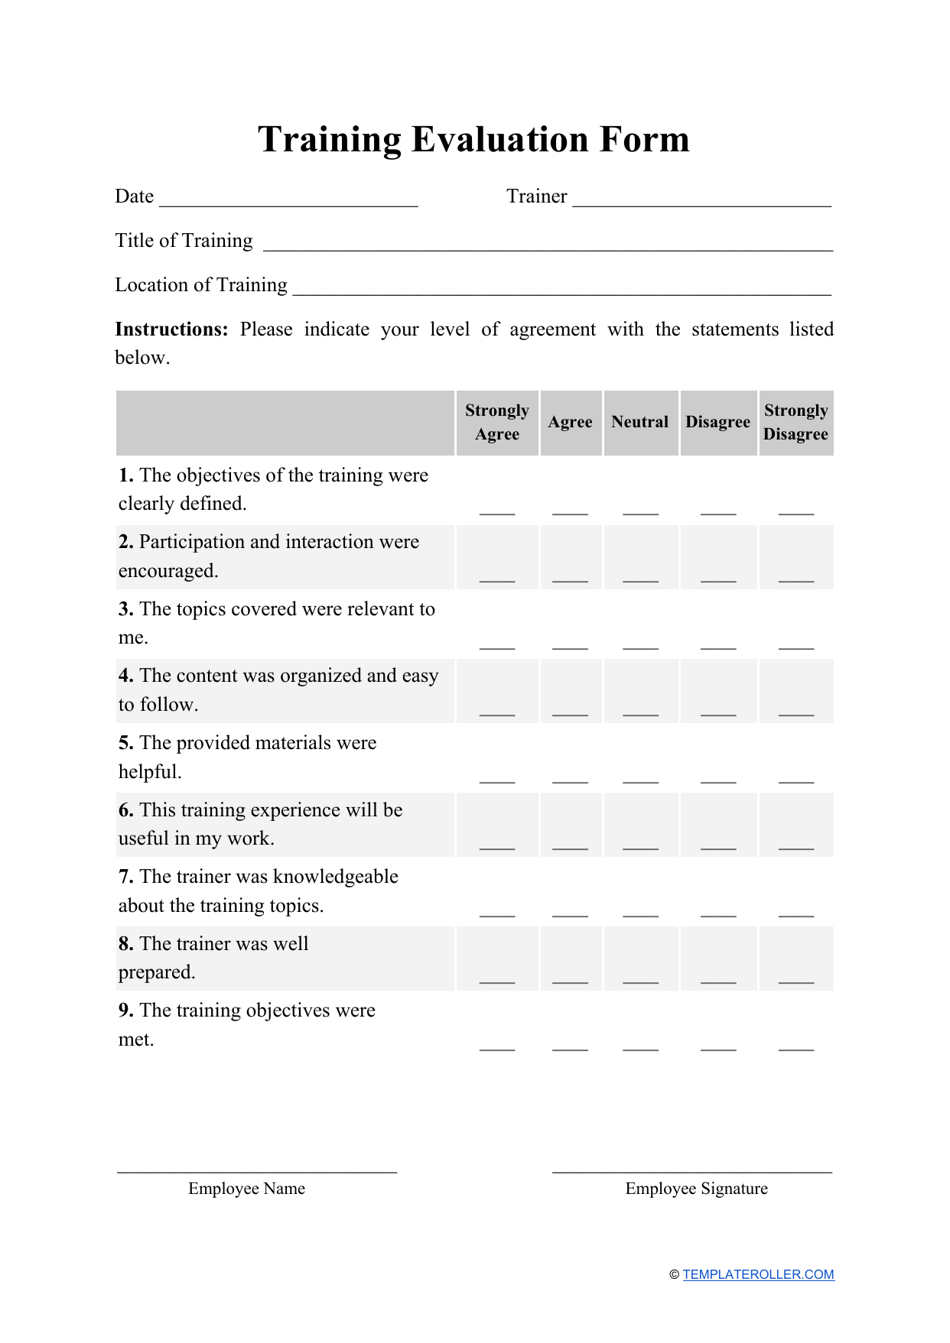 Training Evaluation Form, Page 1